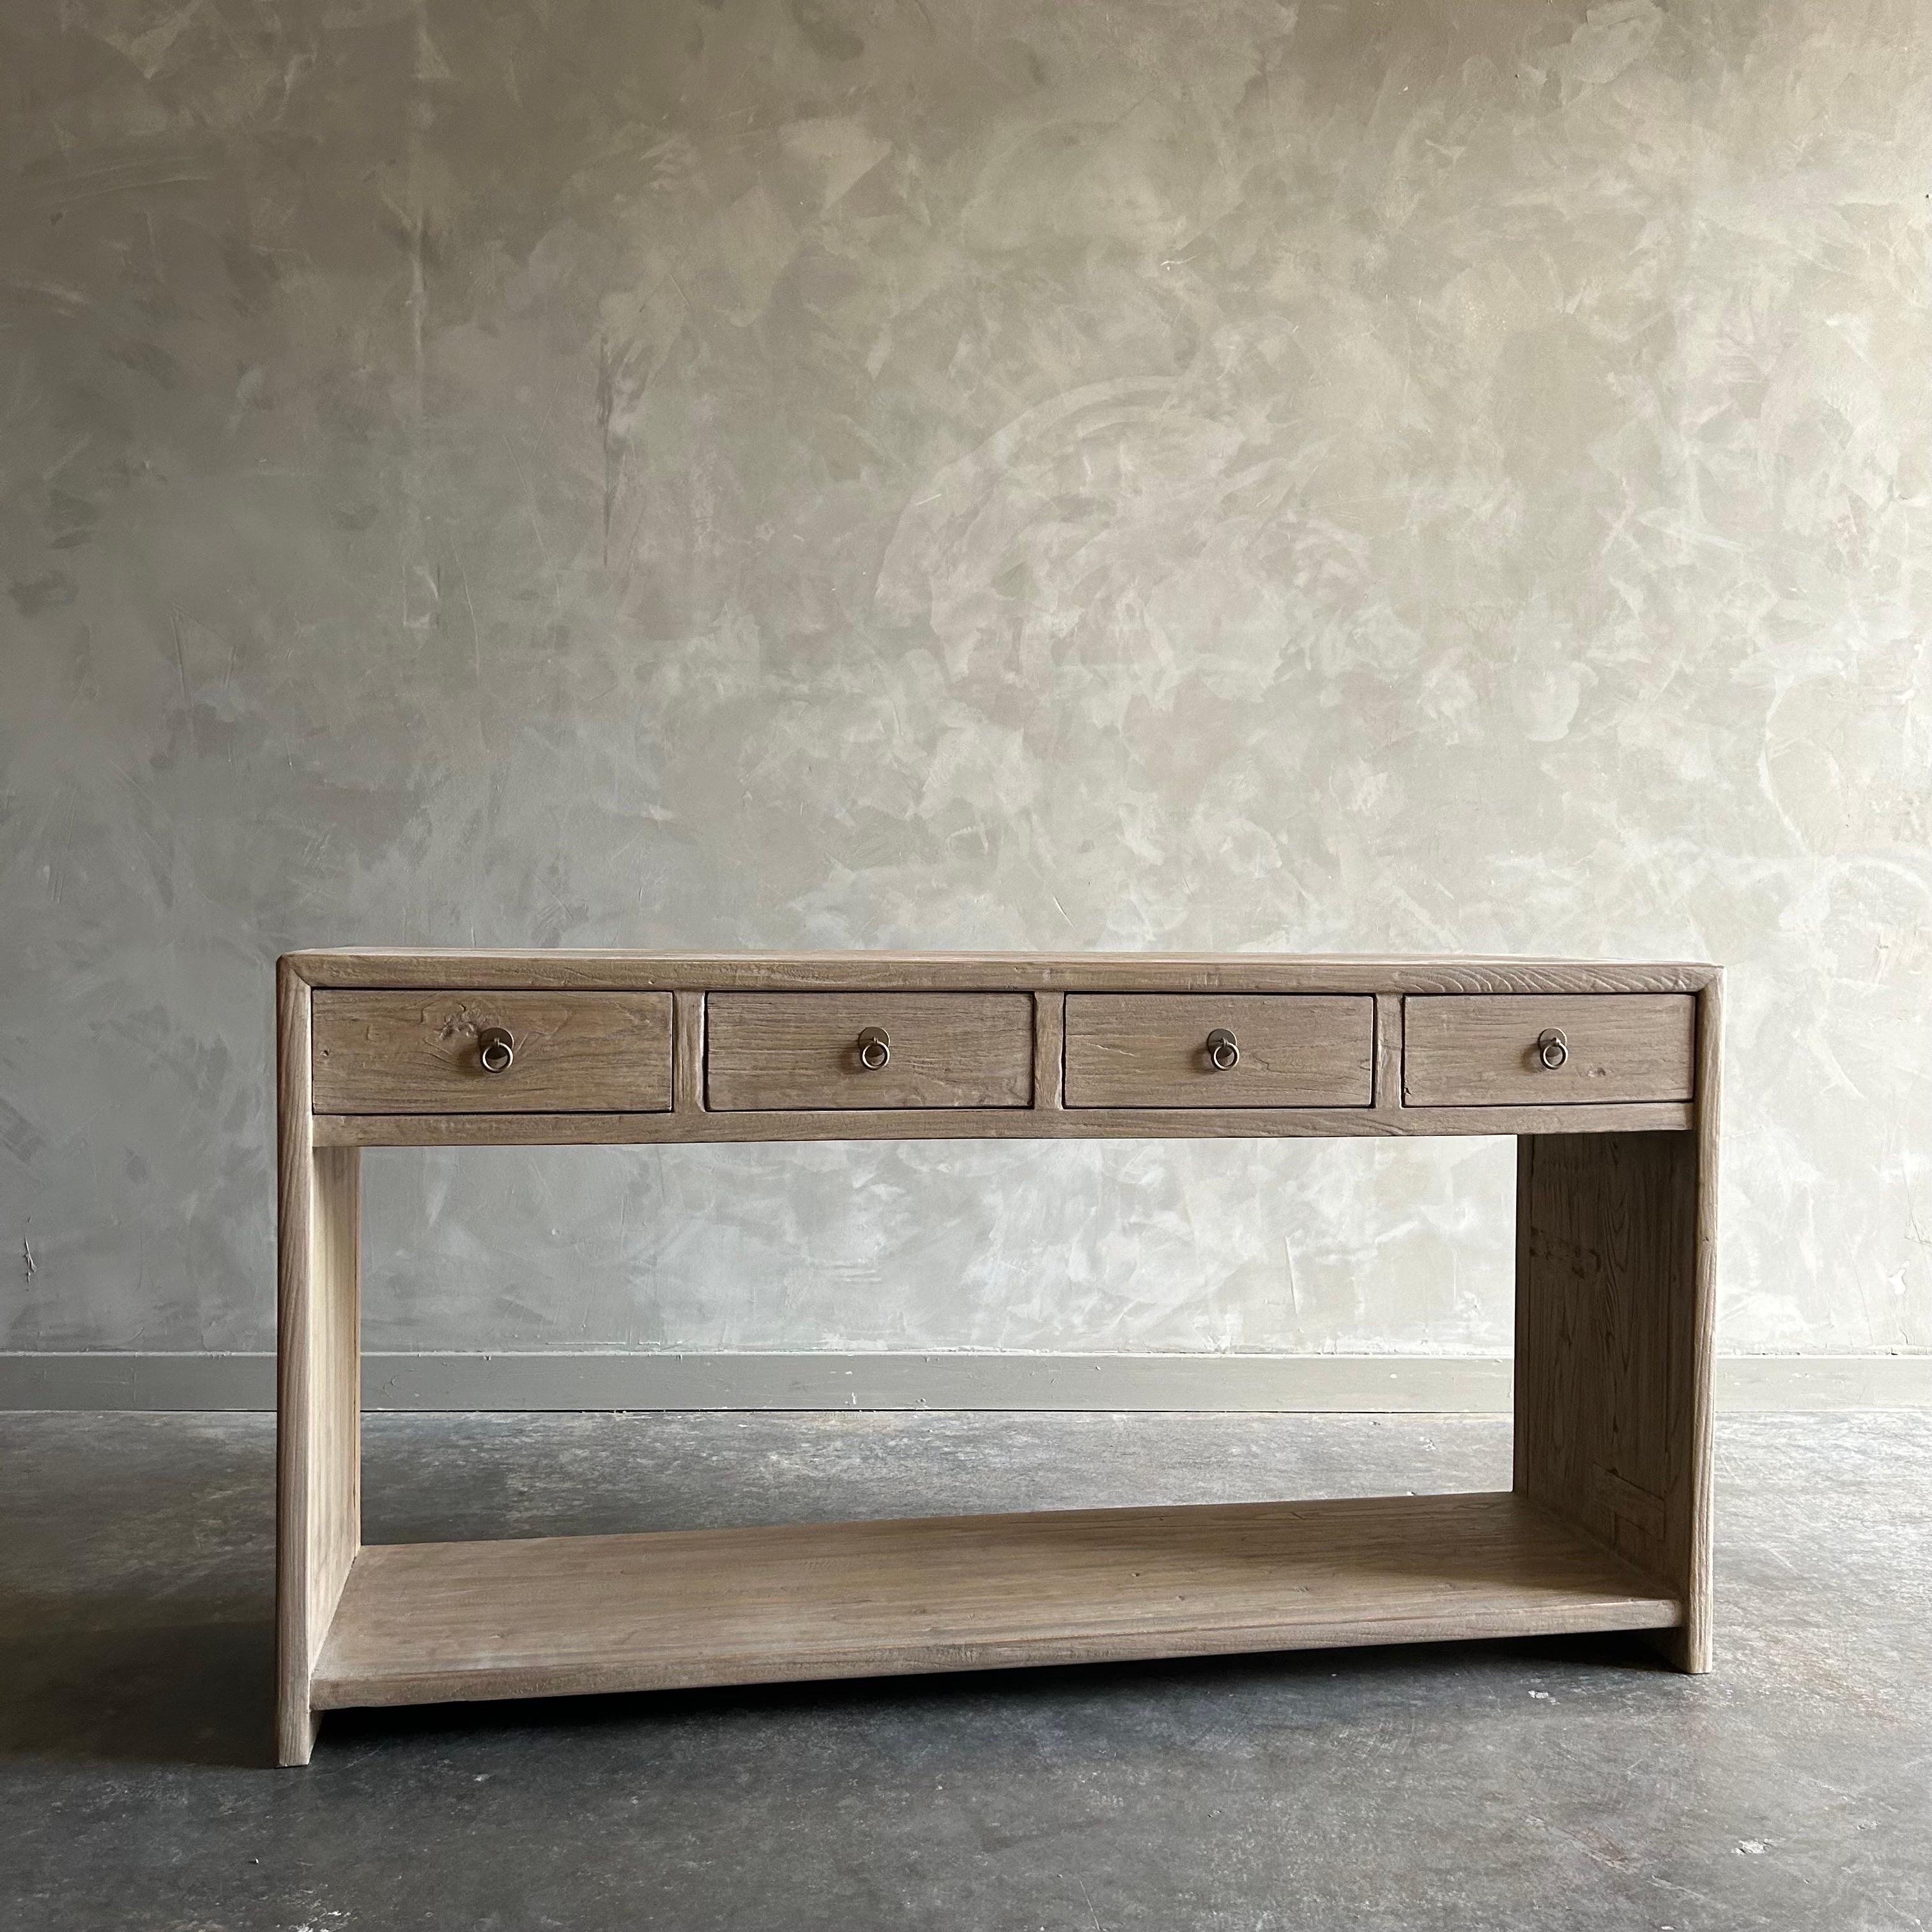 IVAN NATURAL CONSOLE TABLE
Natural reclaimed elm wood that is beautifully crafted and serves as the perfect storage solution for any space. Since this is made from vintage reclaimed materials, there may be some imperfections in the piece or grain of